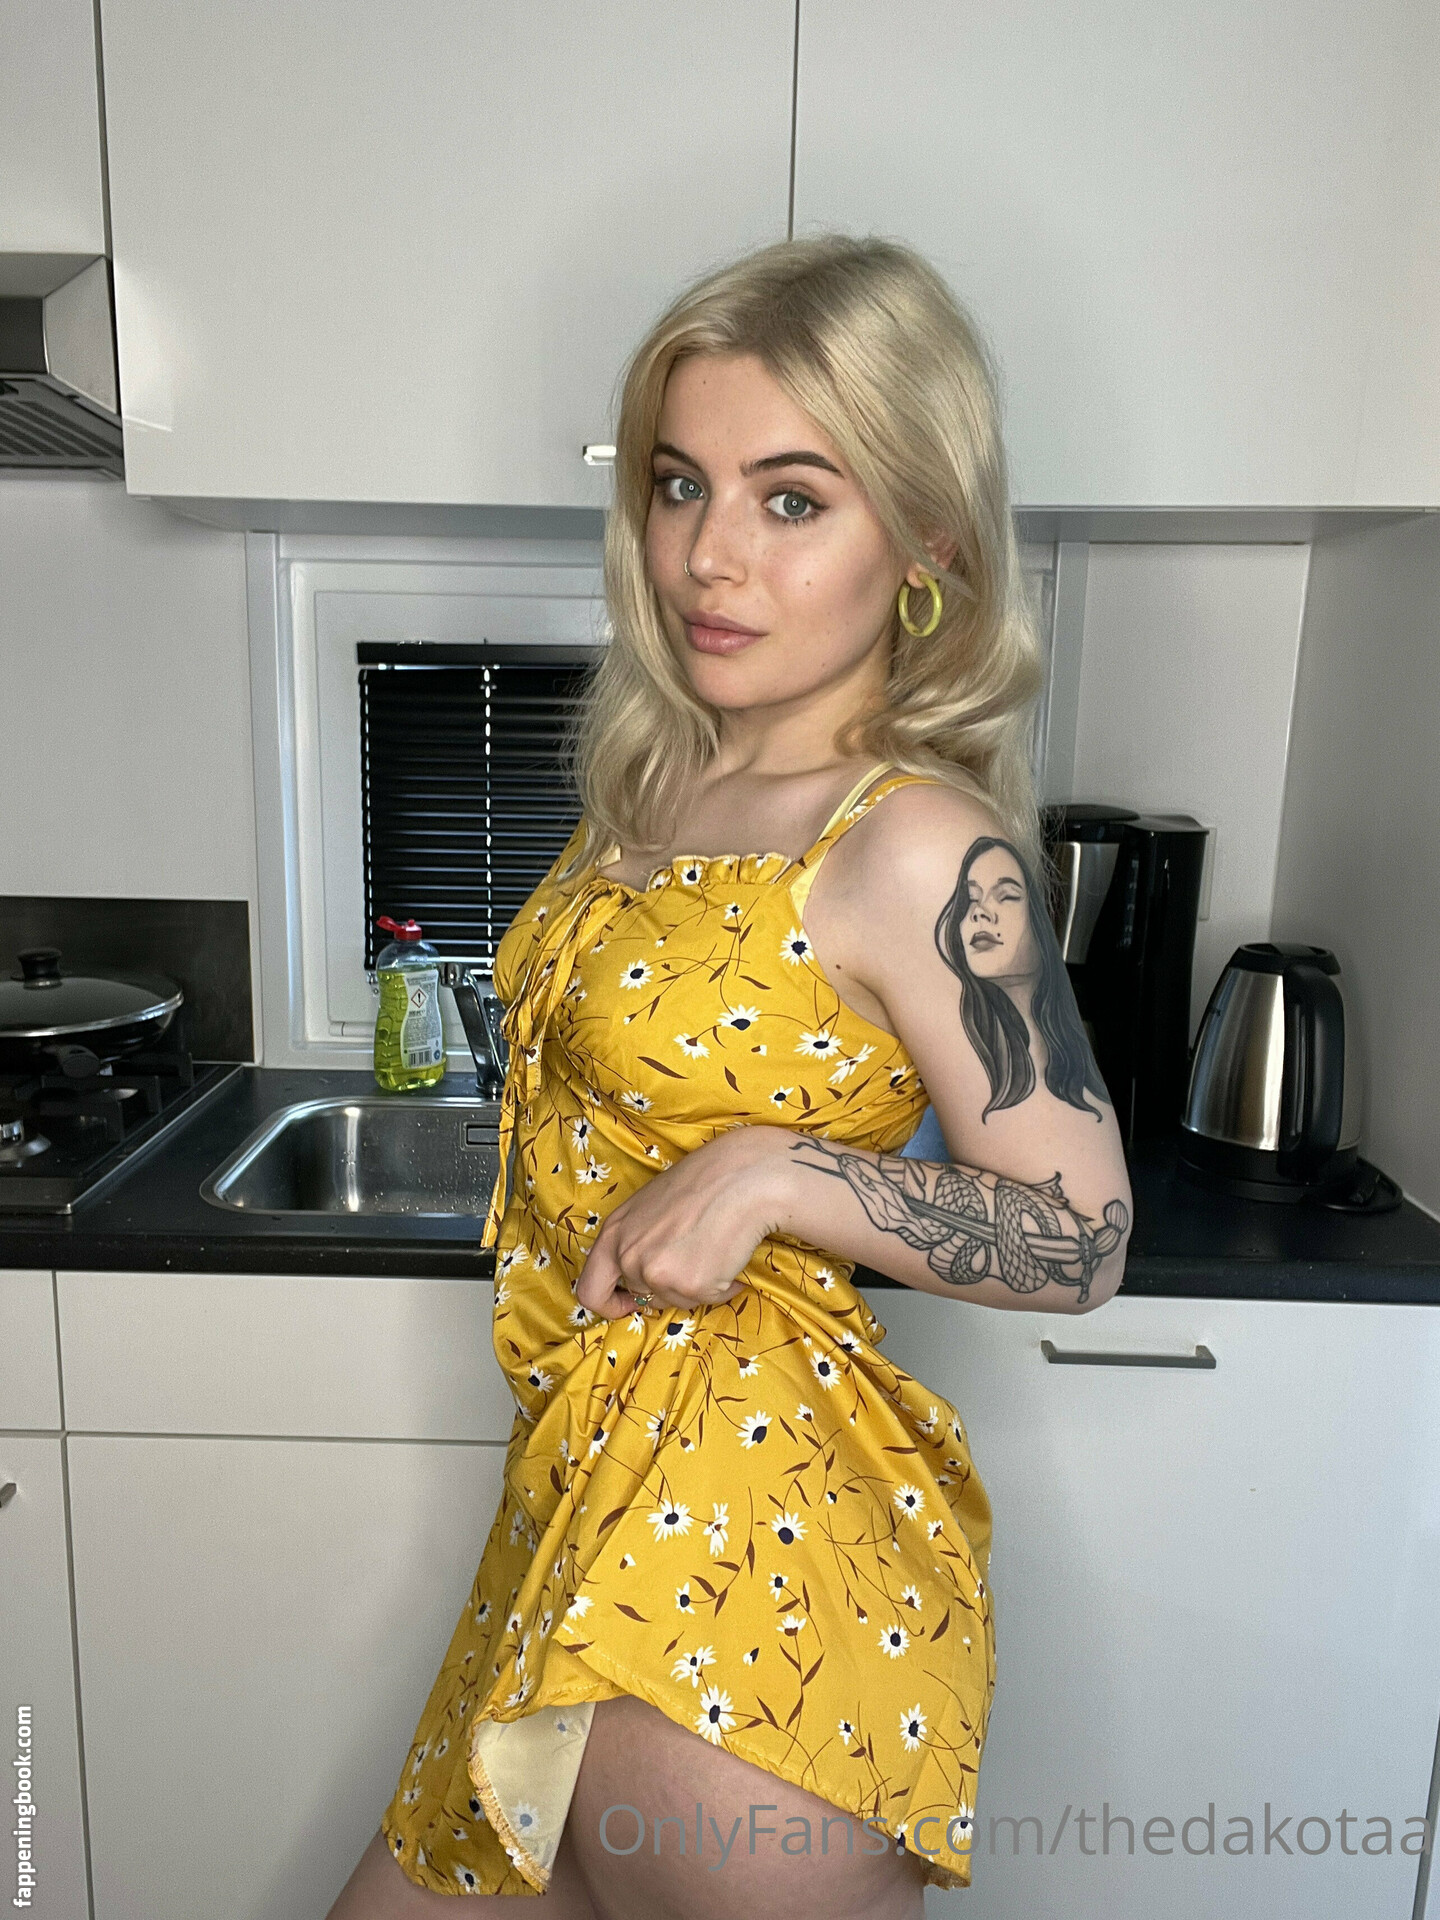 Thedakotaa Nude Onlyfans Leaks The Fappening Photo Fappeningbook